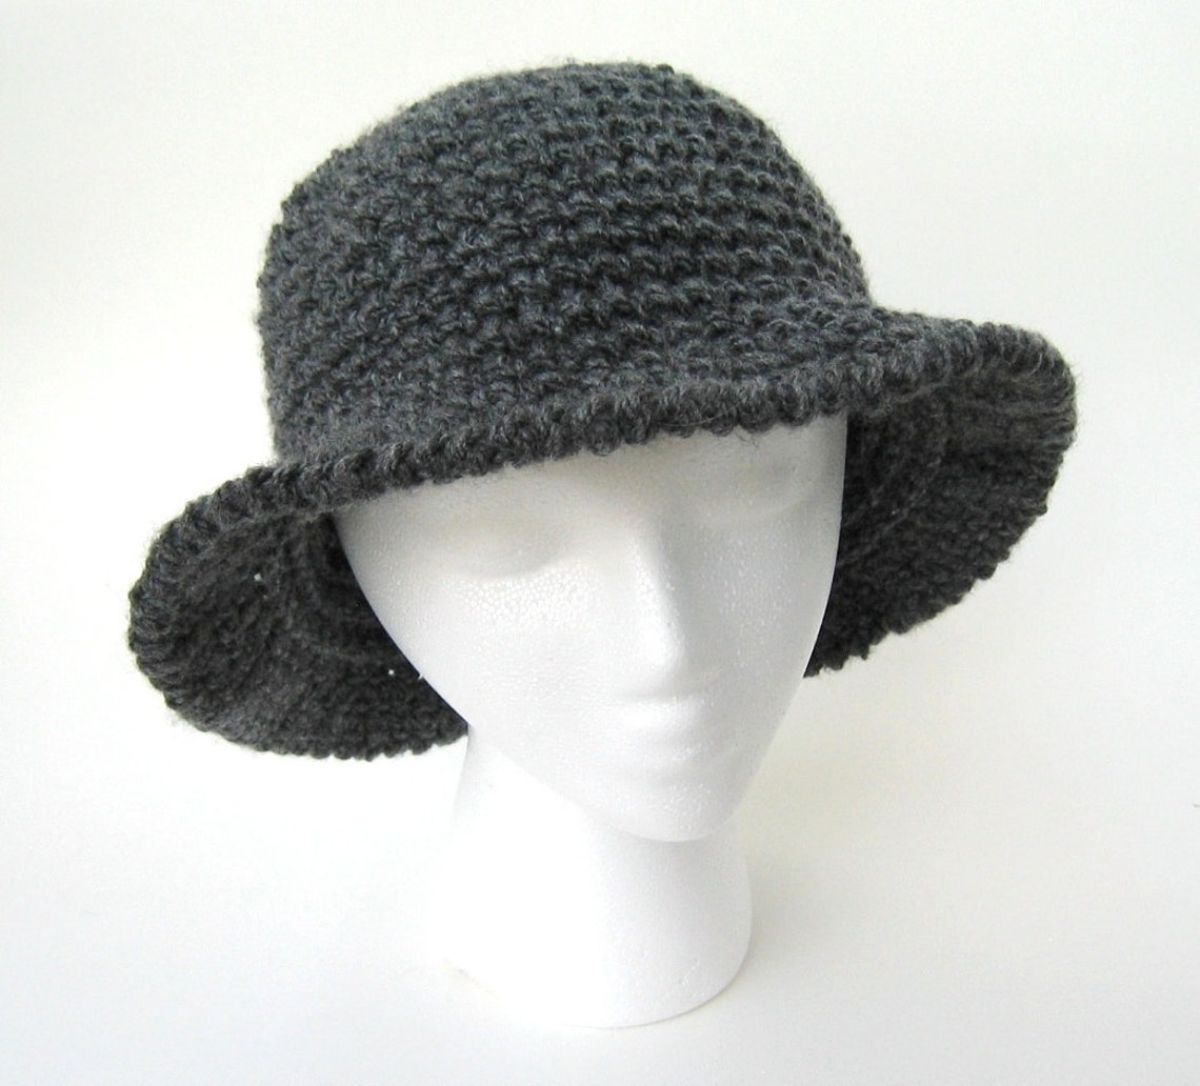 Mannequin wearing a green crochet skein hat with a large band around all sides of the hat.